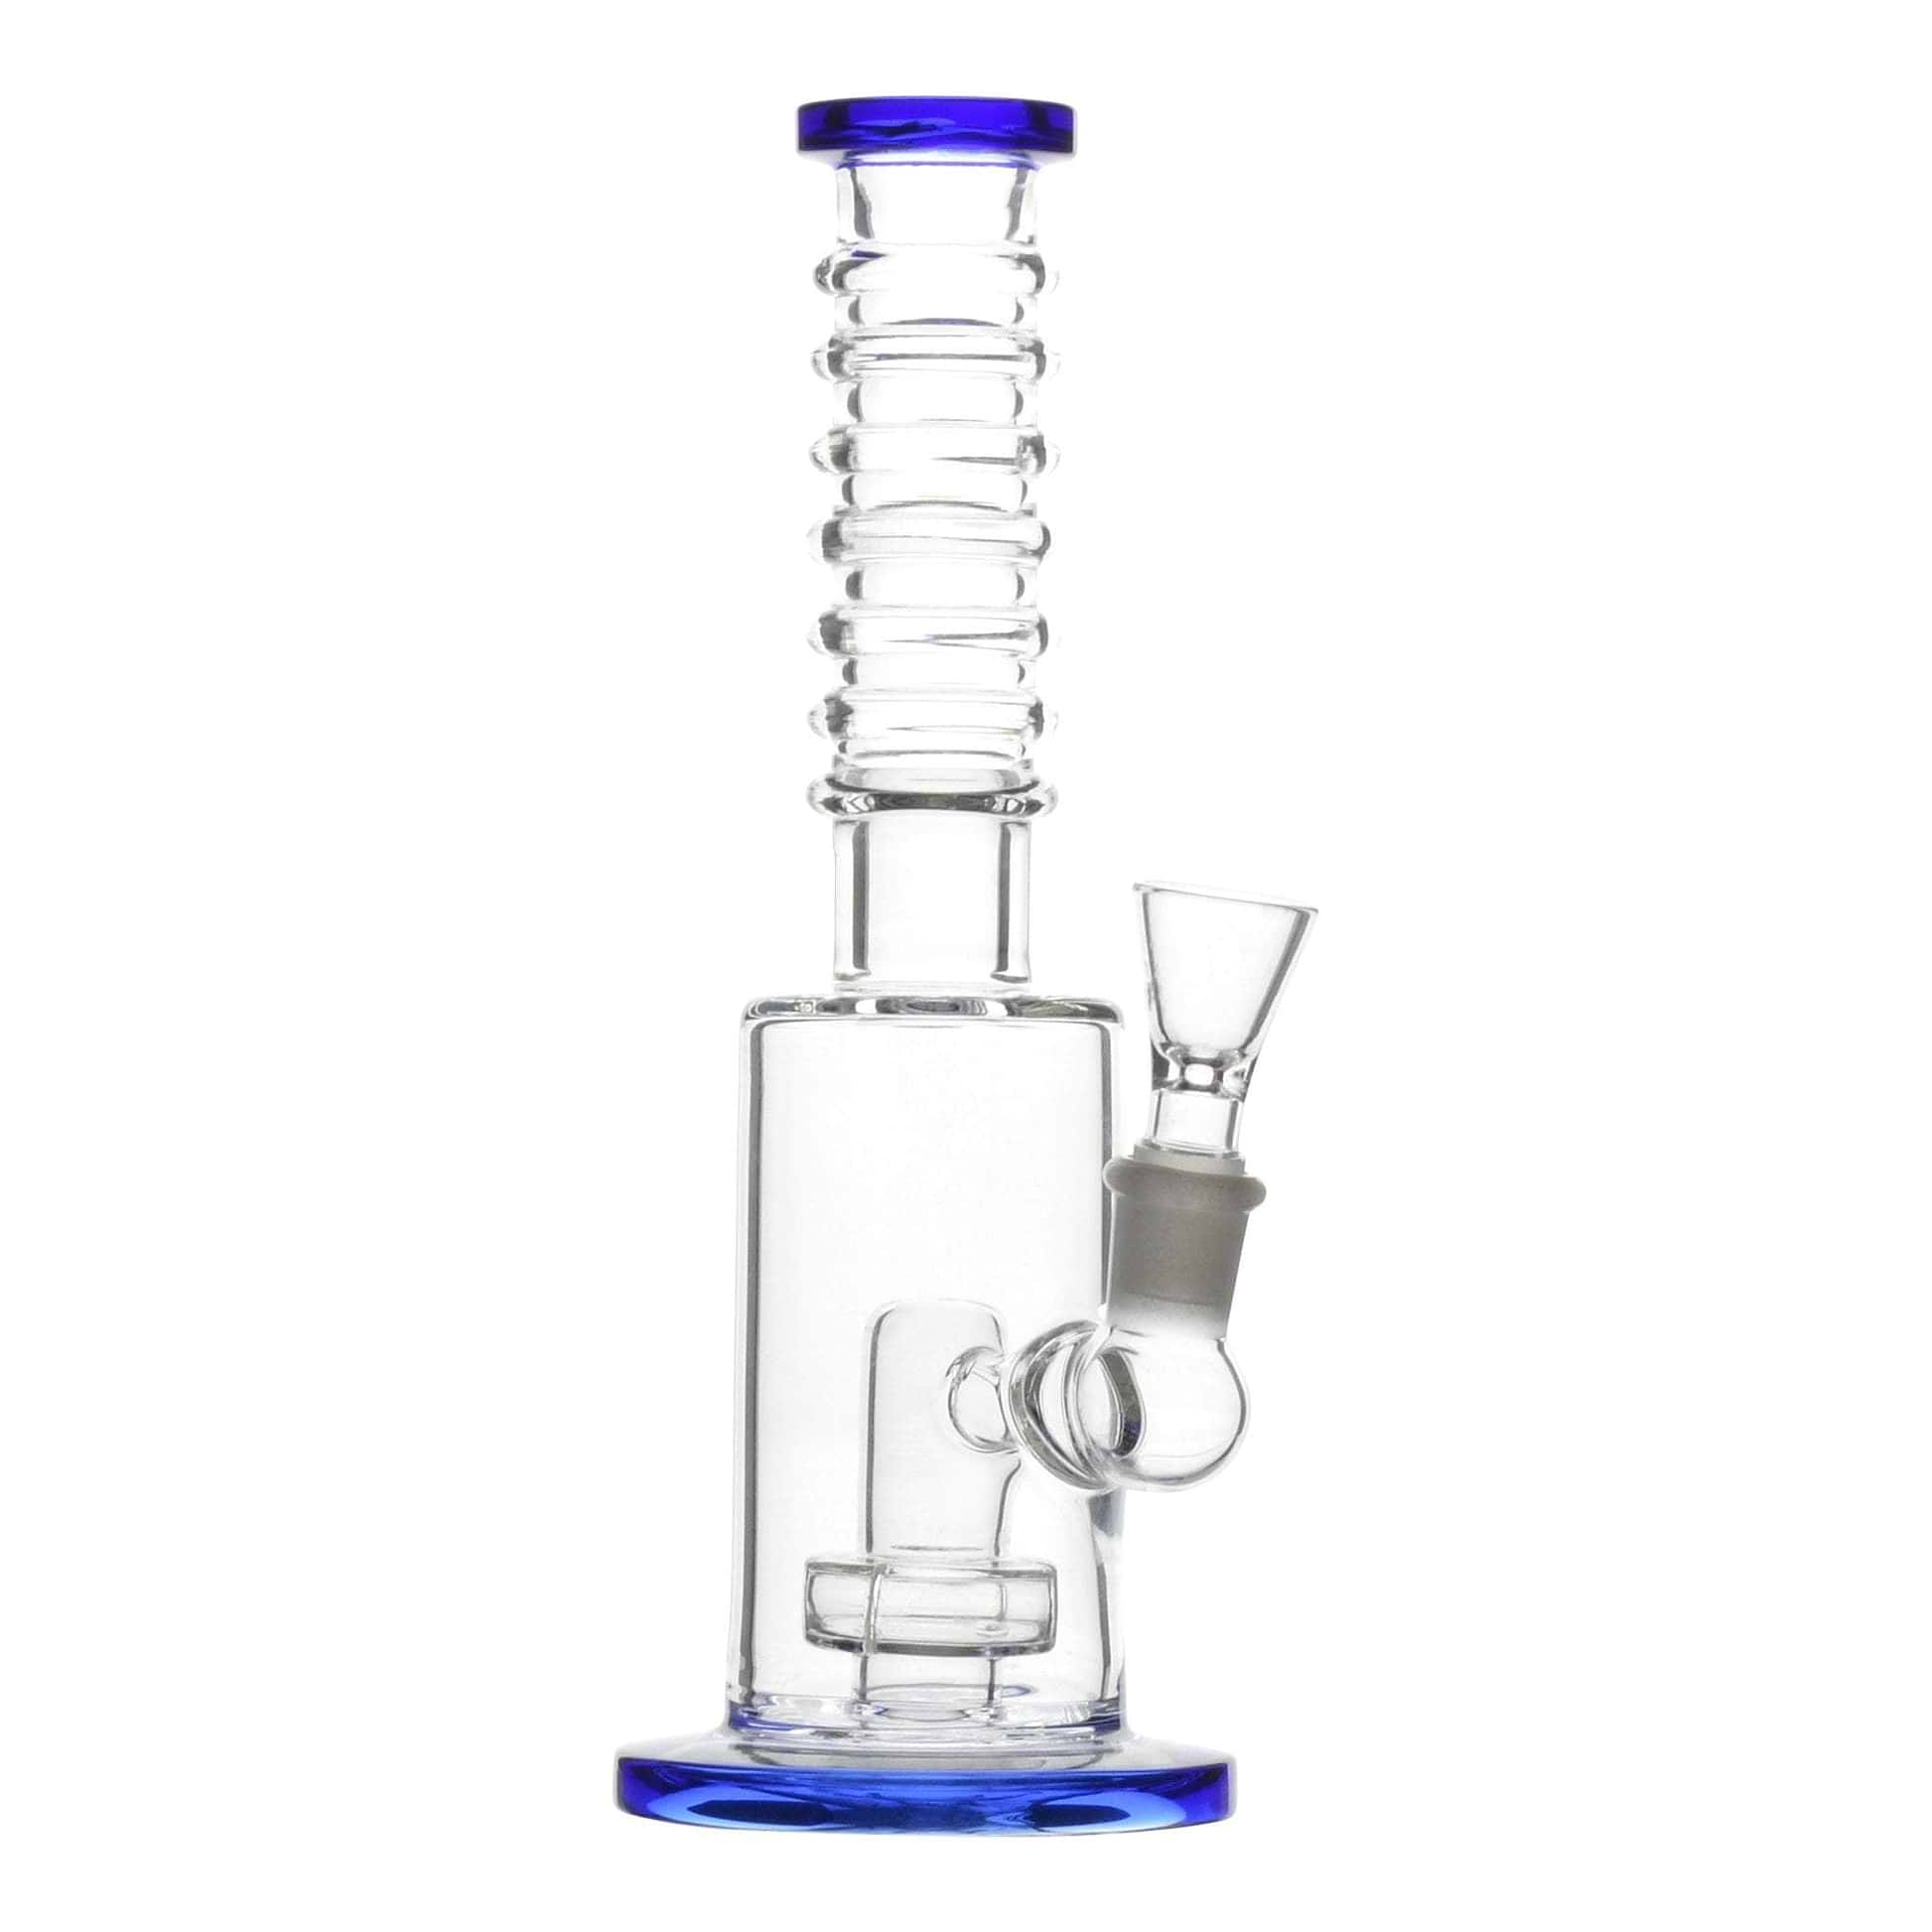 Knobby Disk Perc Bong - 9in